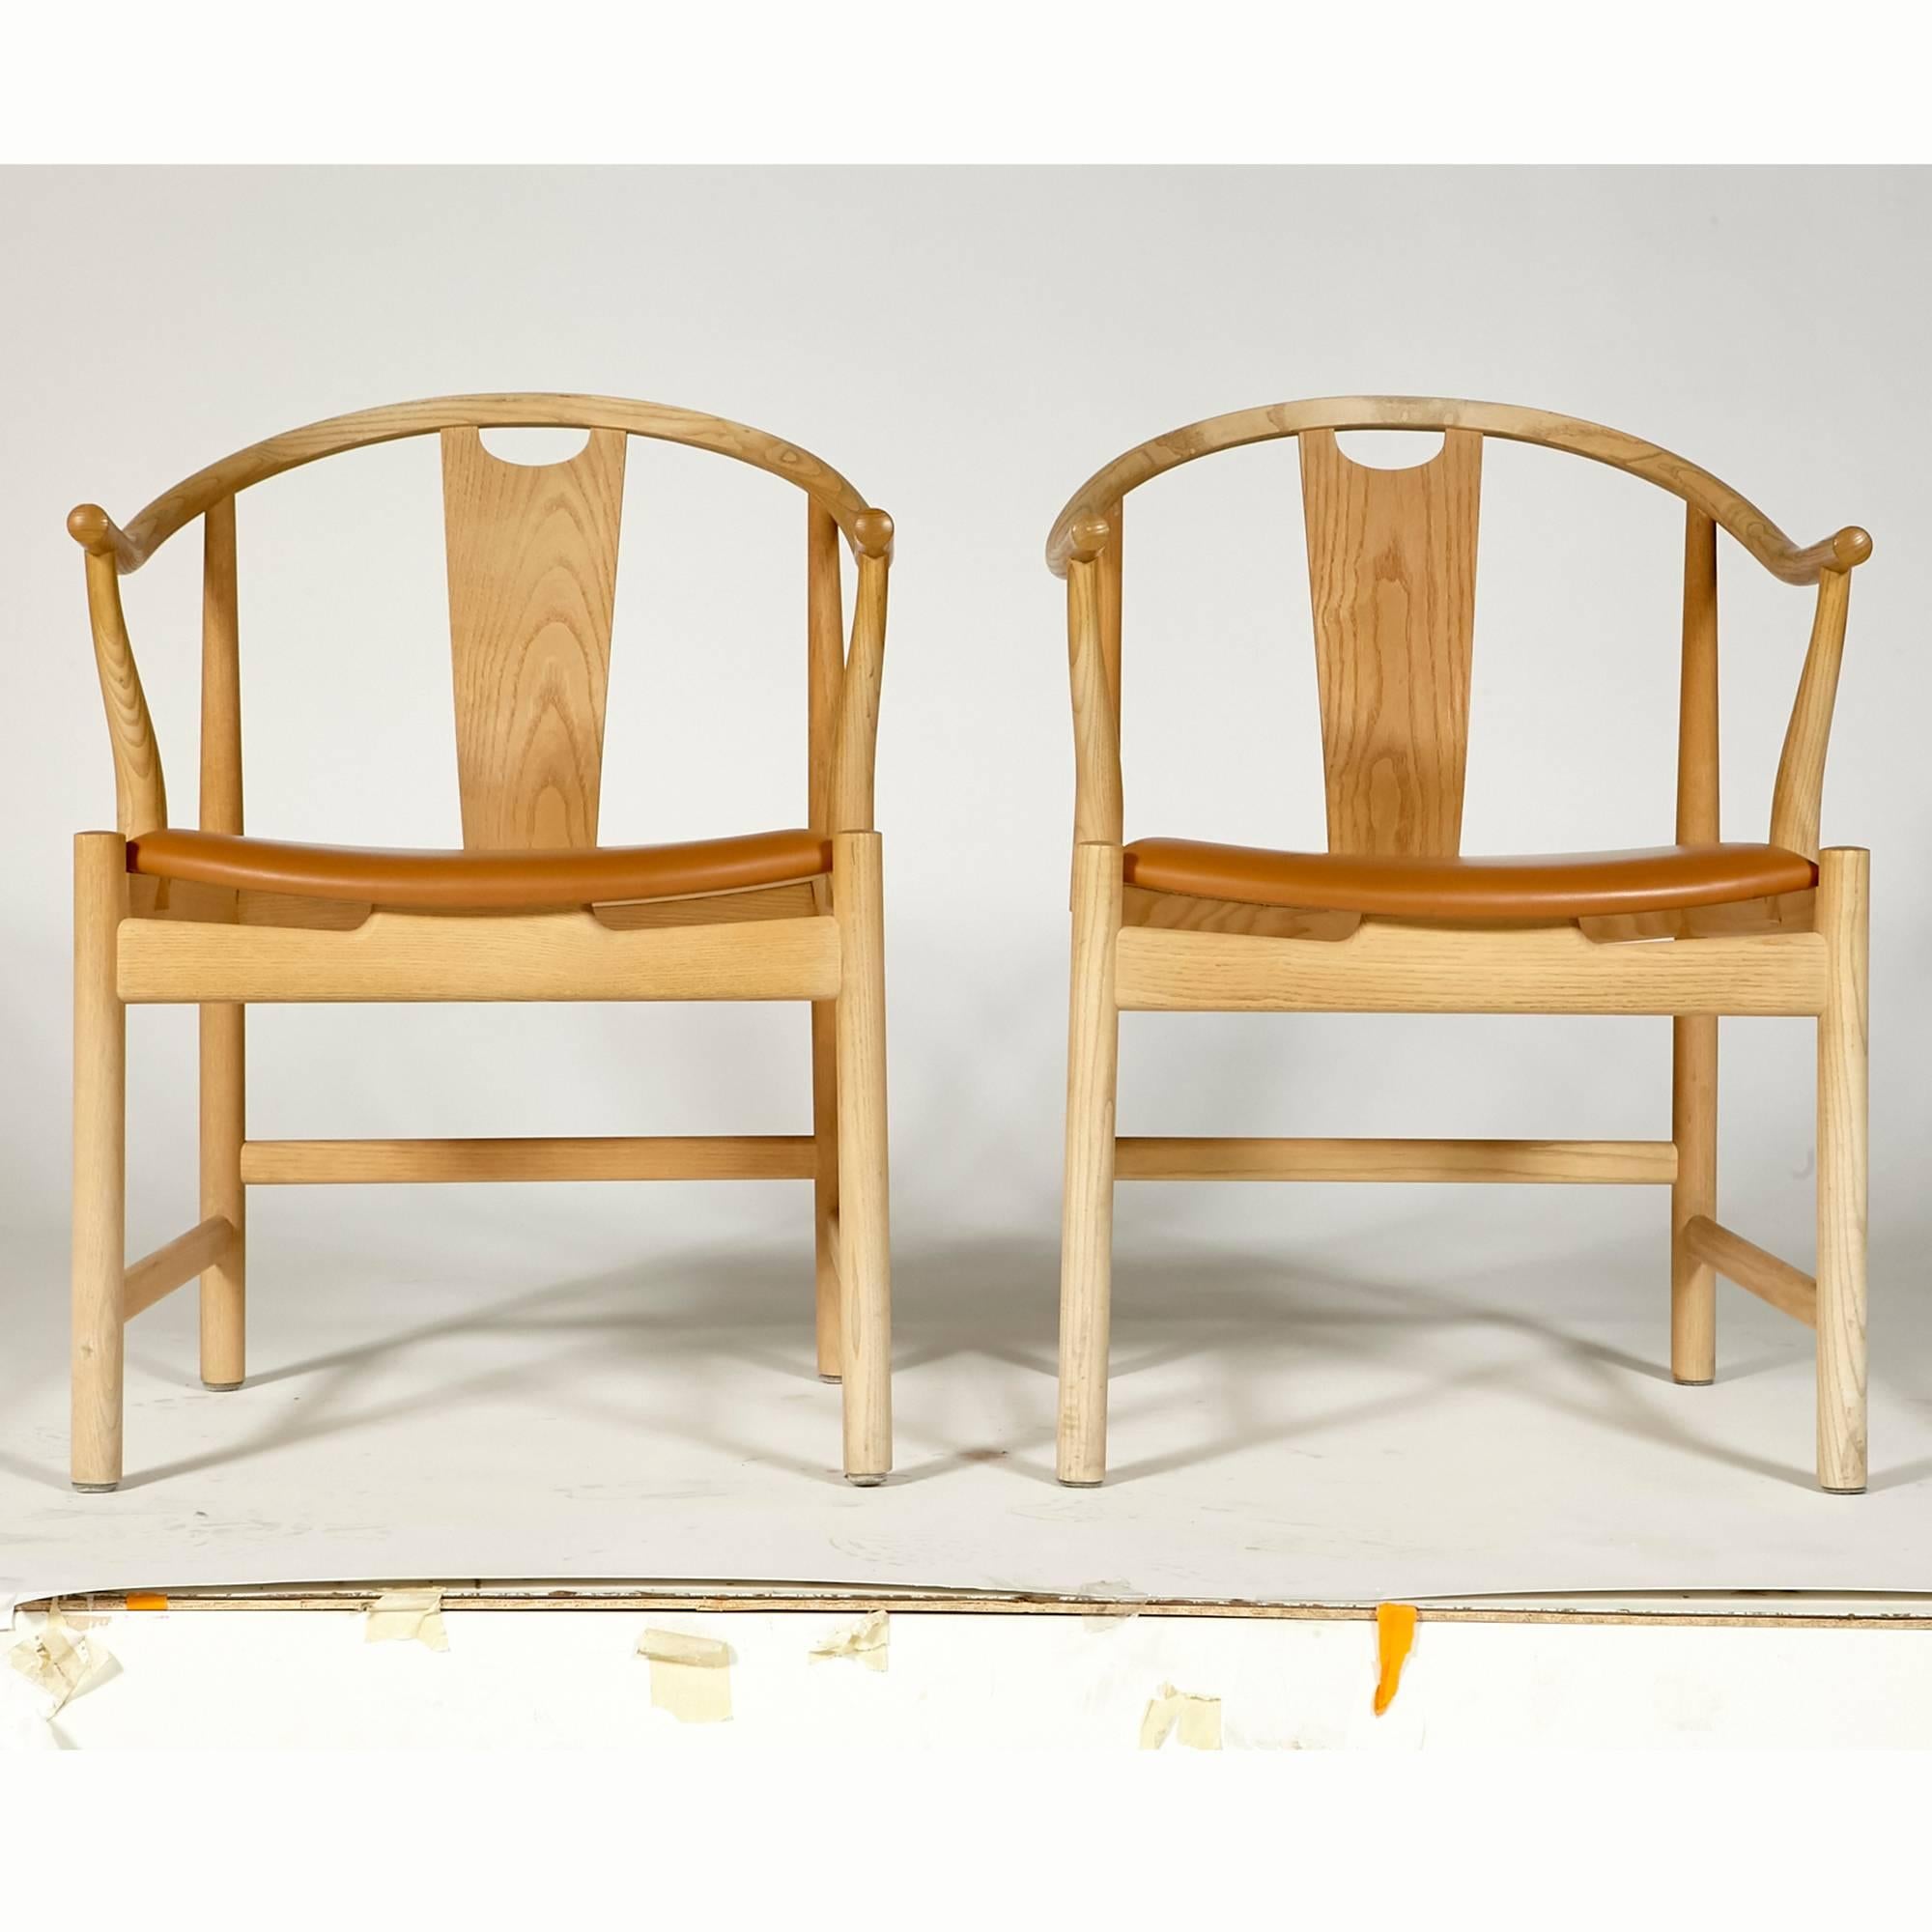 Pair of China chairs designed by Hans J. Wegner for PP Mobler in ashwood. The chairs have new cognac leather upholstery. Excellent condition. Marked.



 